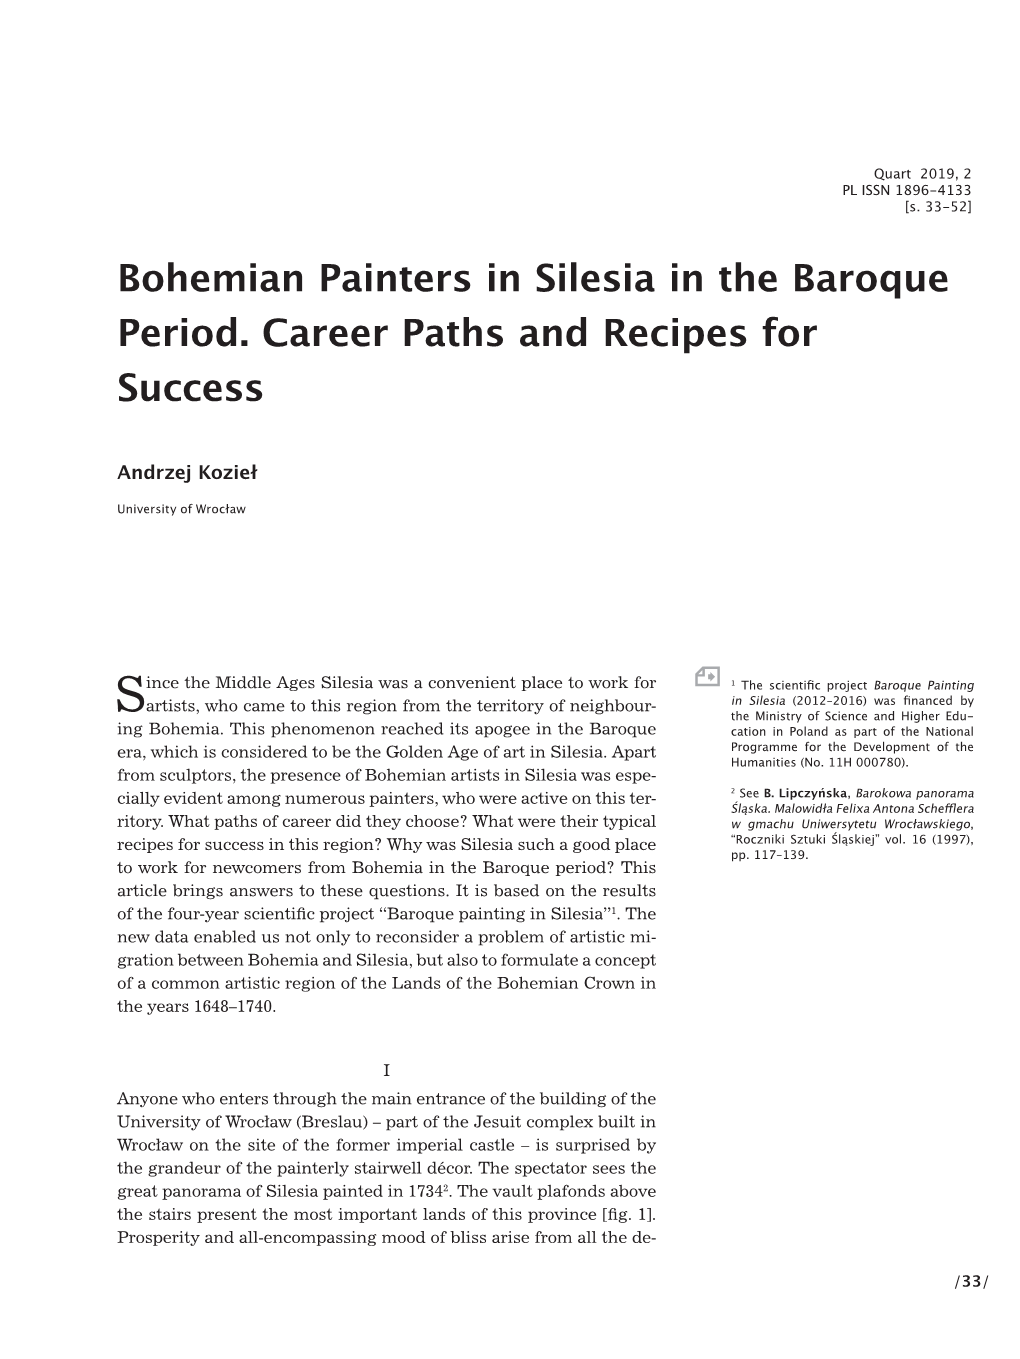 Bohemian Painters in Silesia in the Baroque Period. Career Paths and Recipes for Success